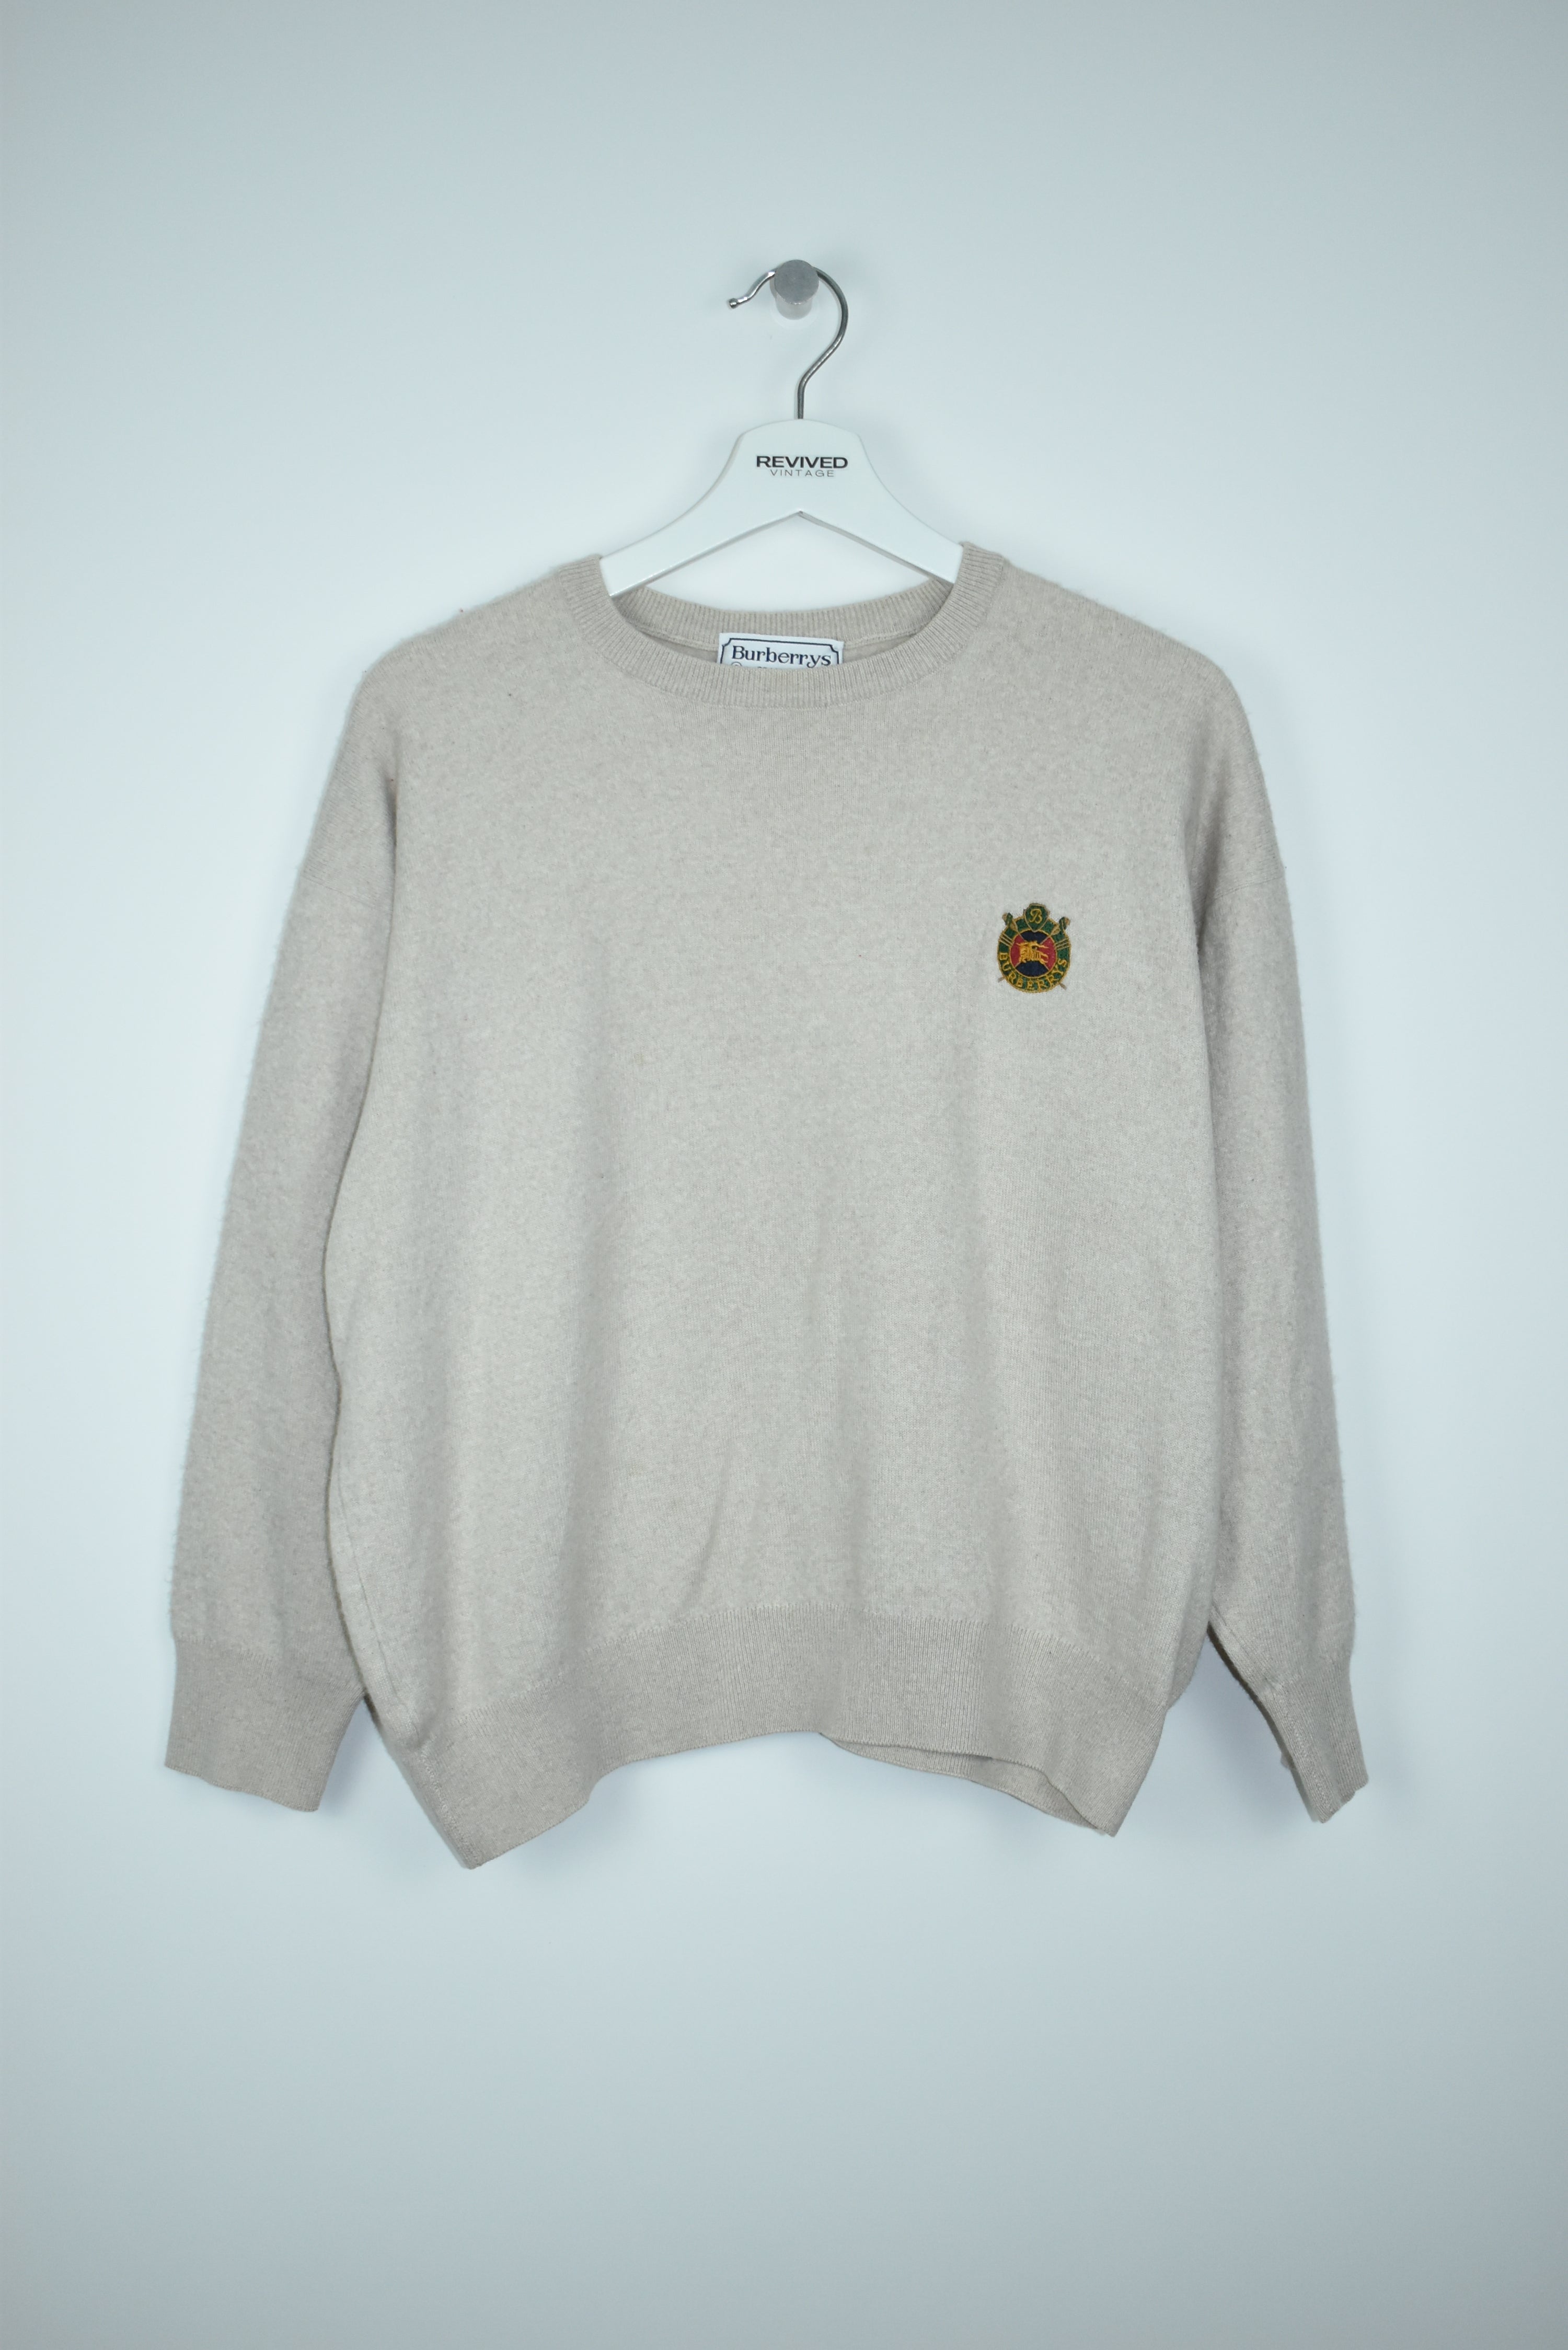 Vintage Burberry Embroidery Logo Knit Sweater Small